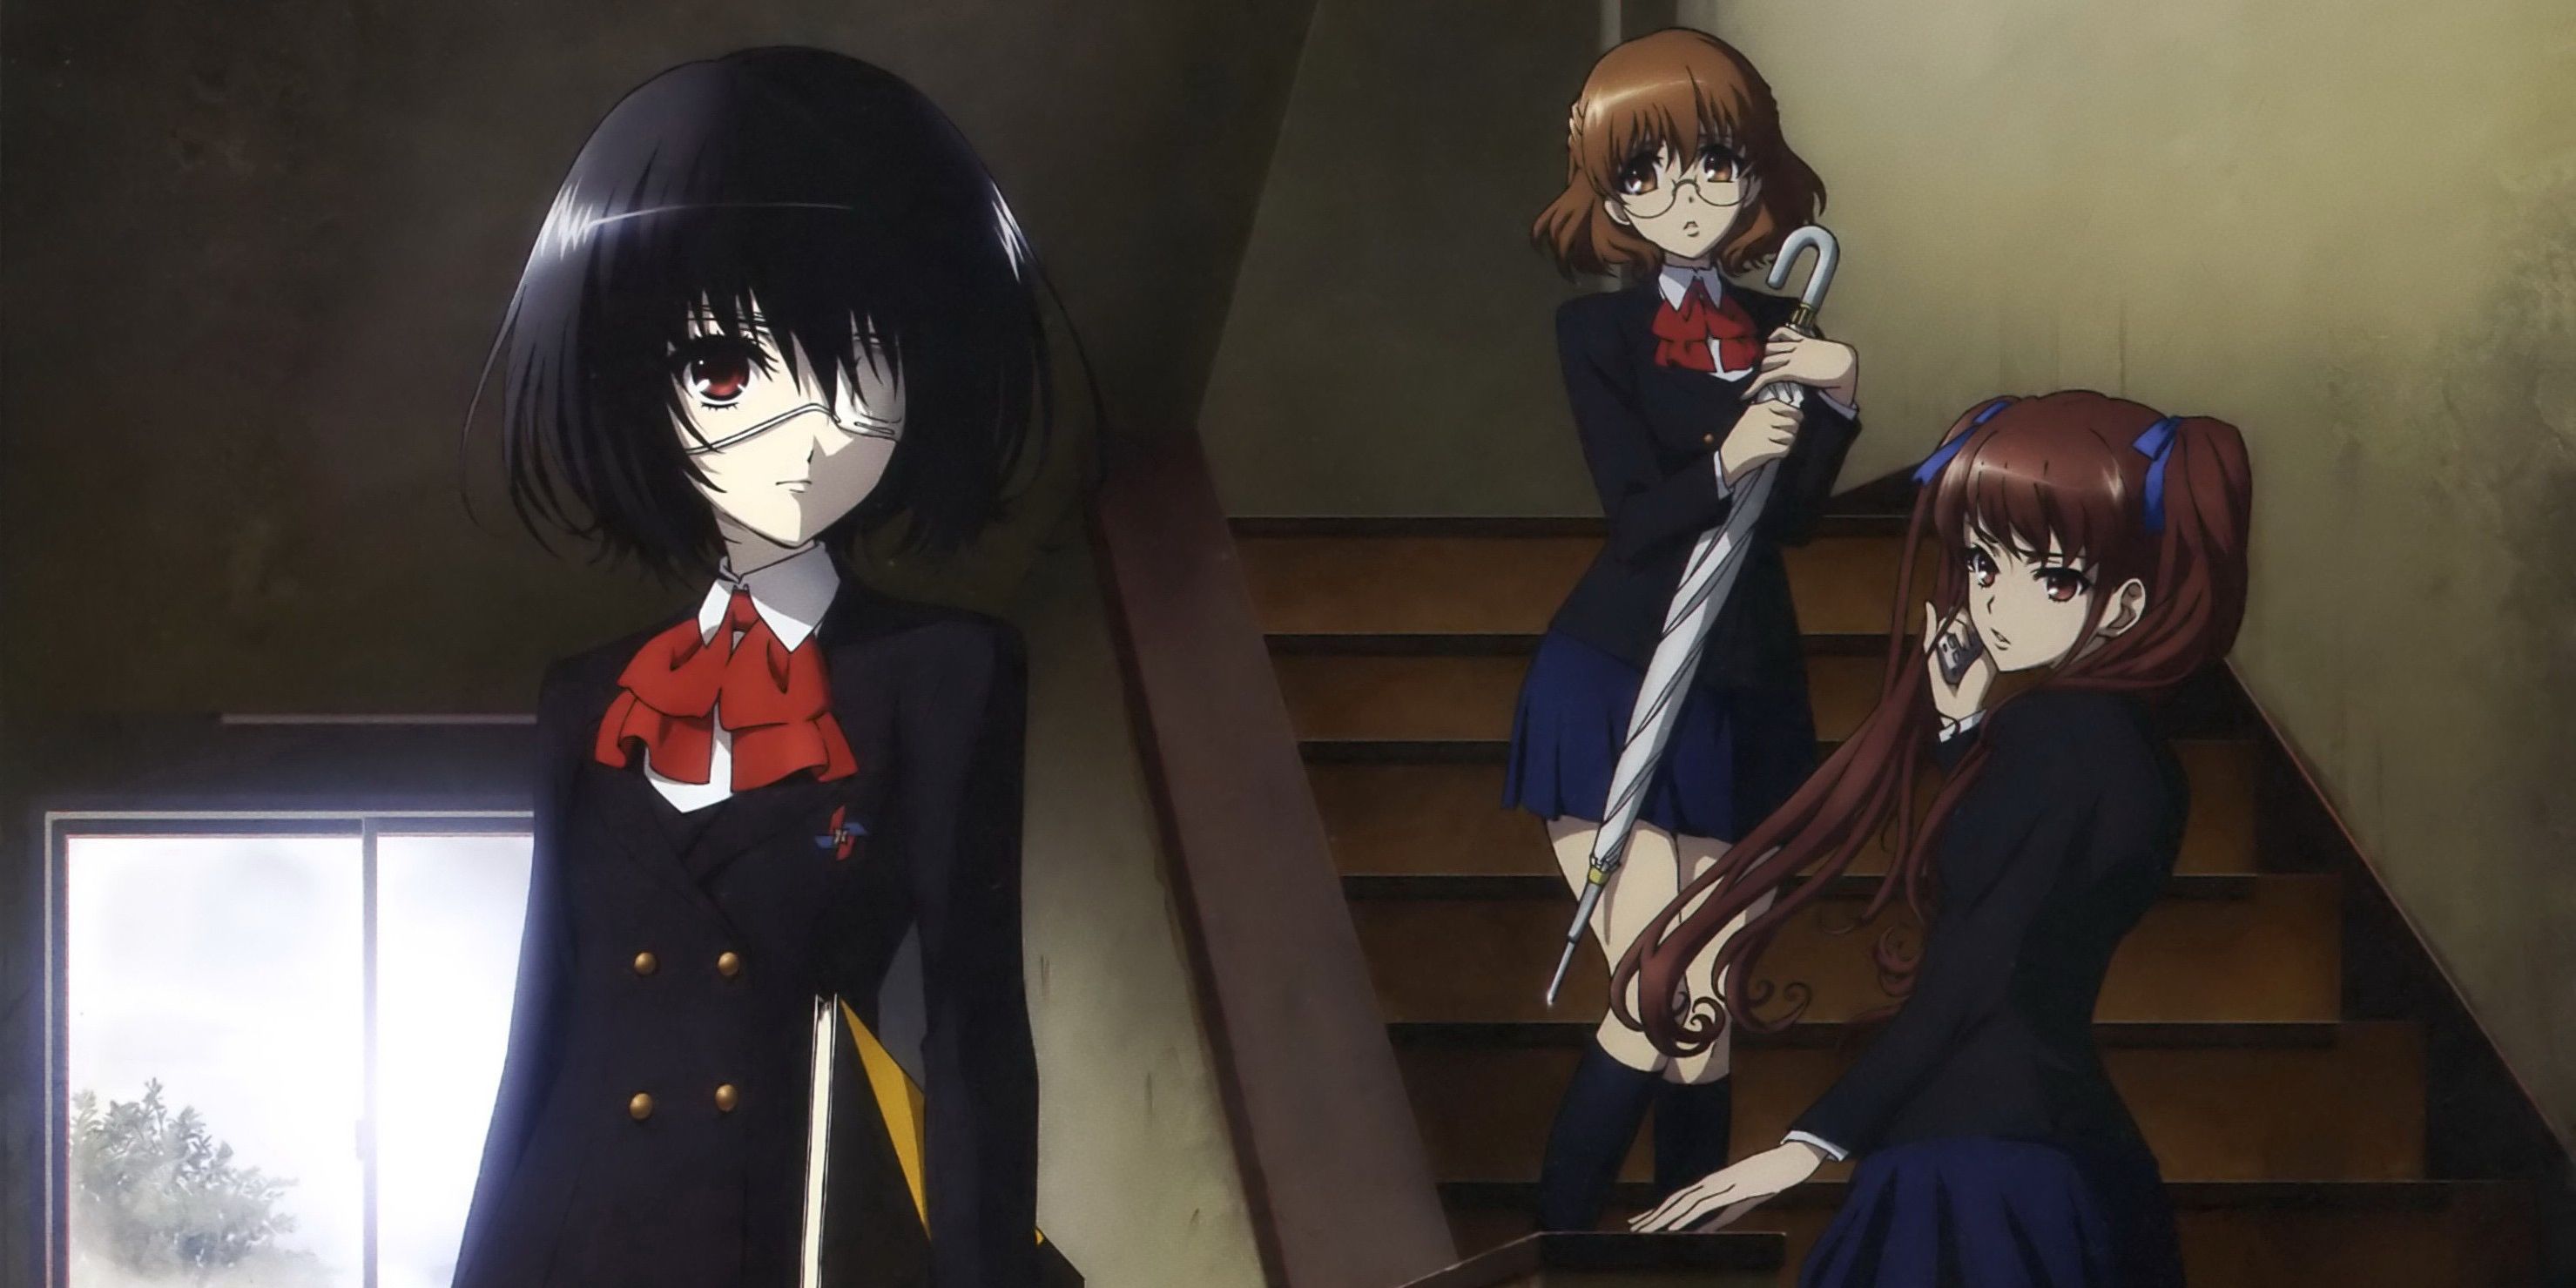 Mei Misaki with other Students on Stairs from Another